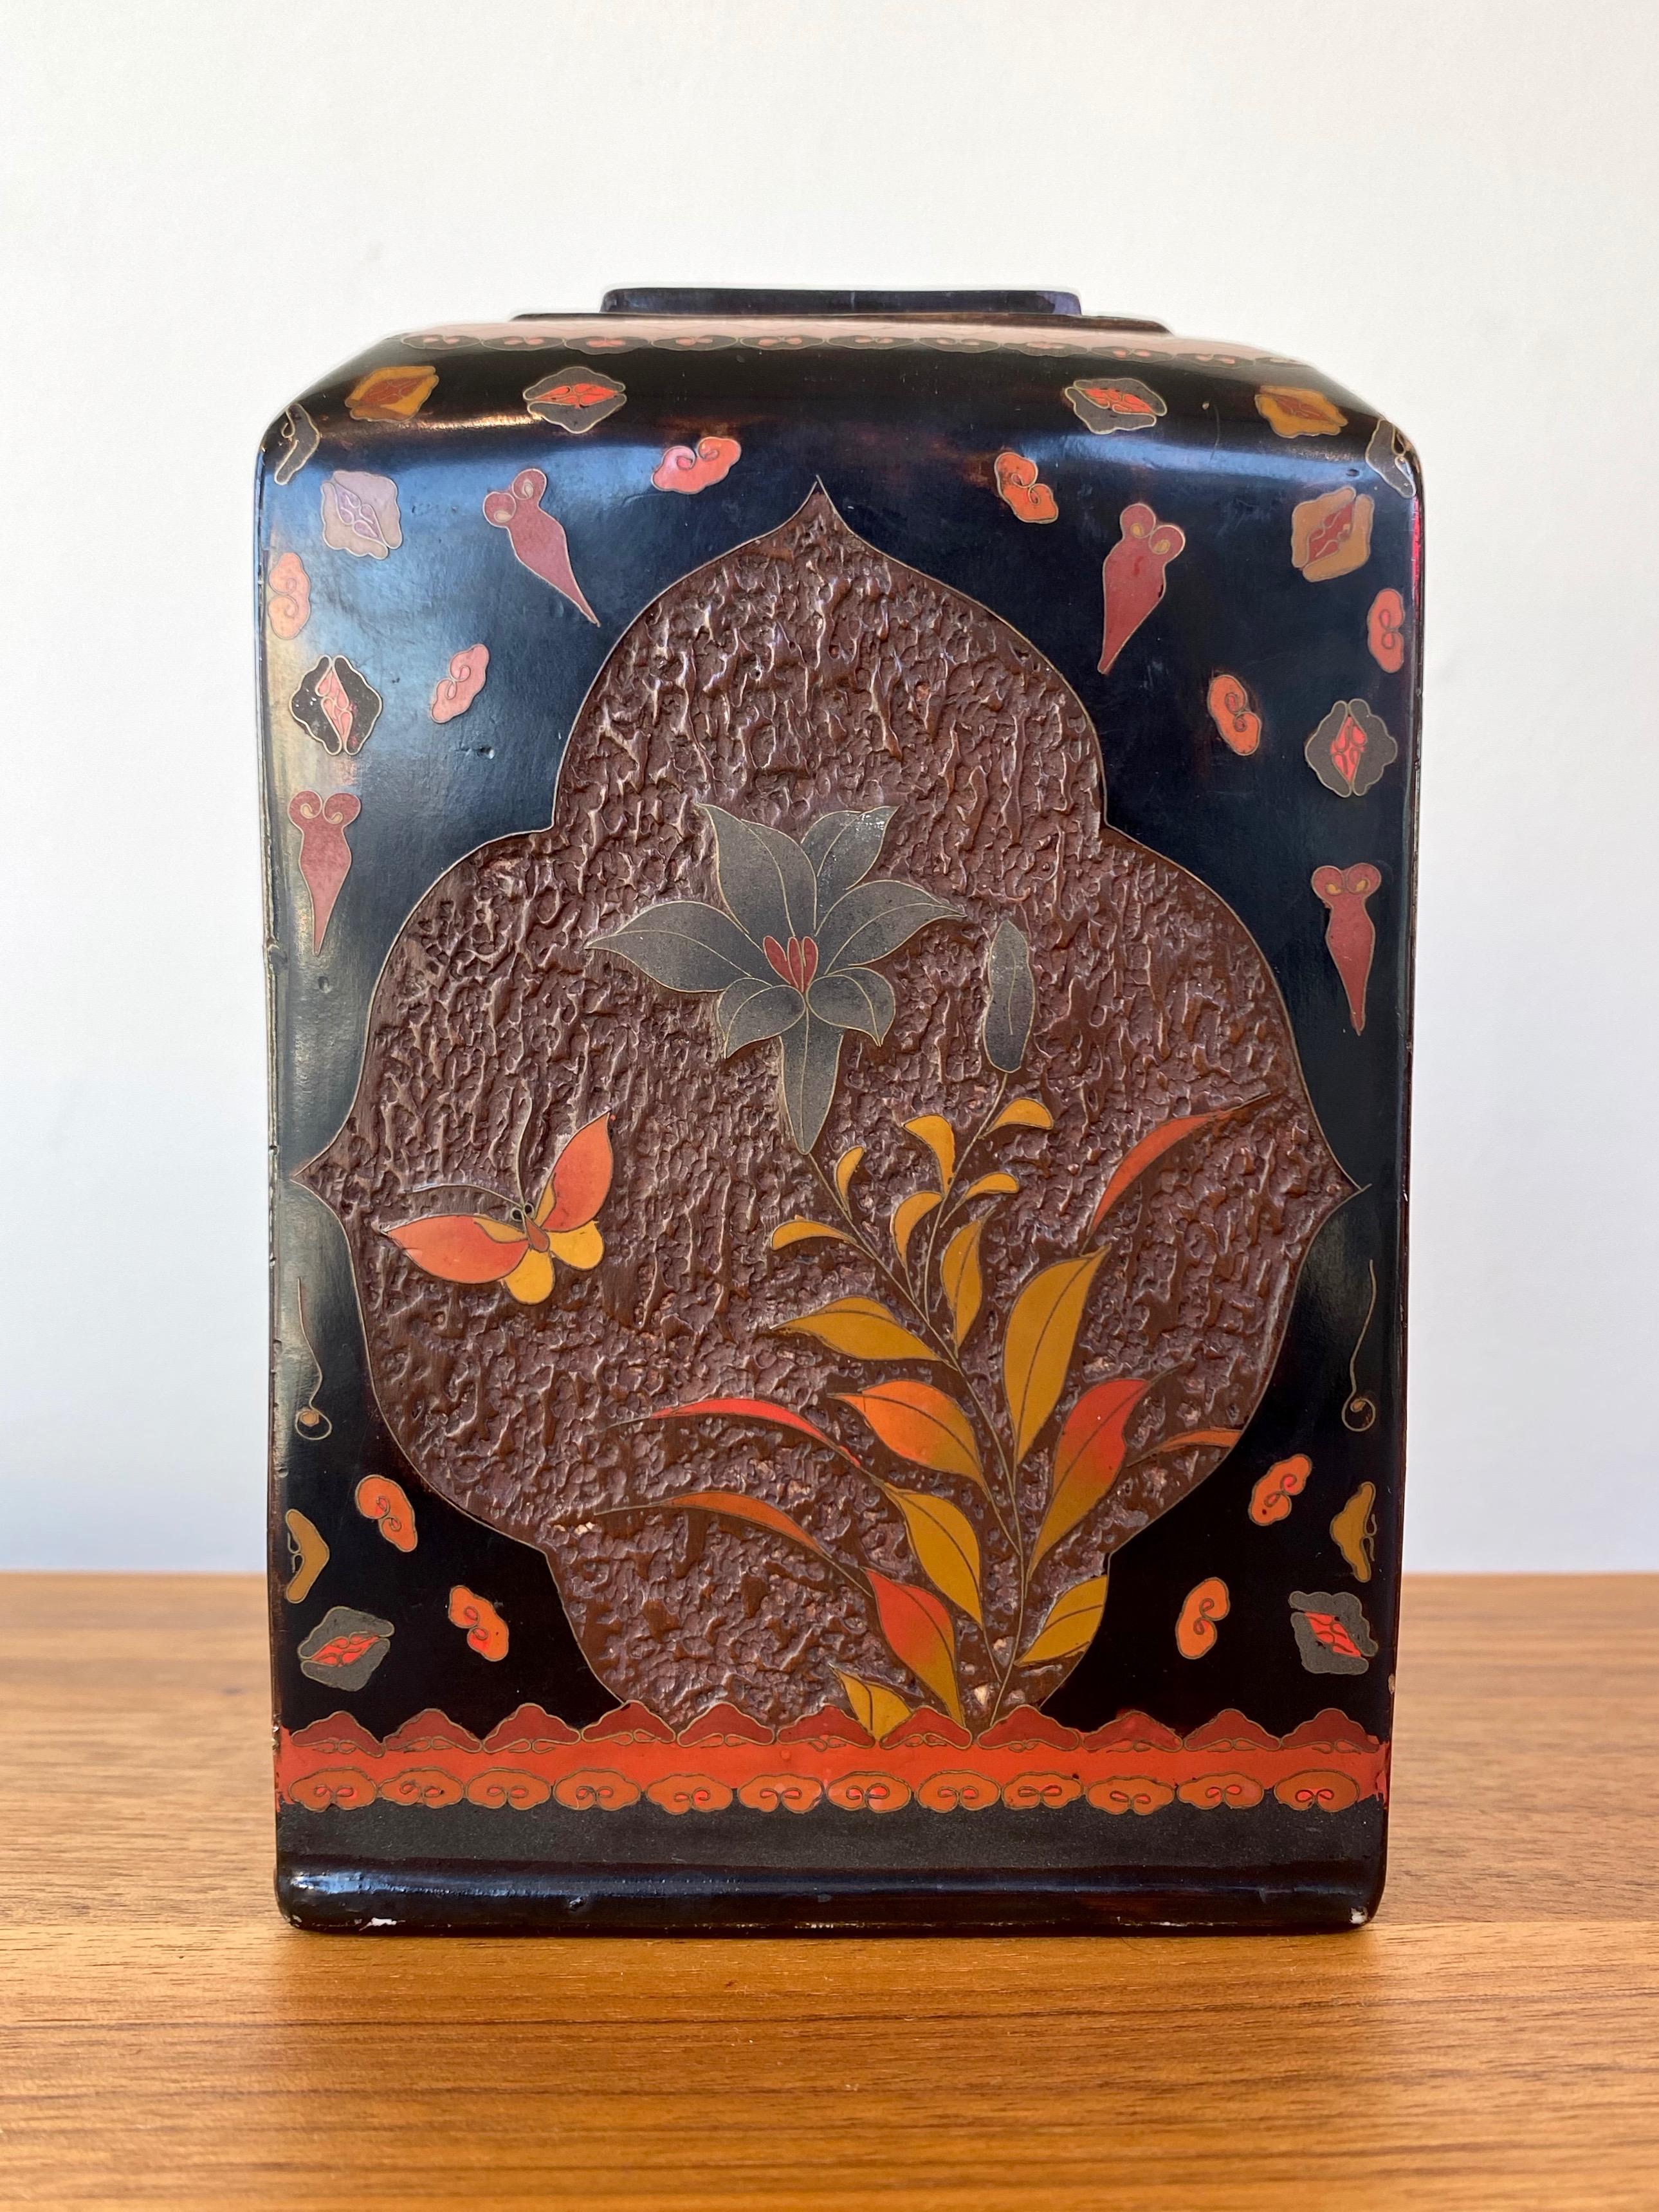 A very charming and warm, vibrantly colored Japanese Meiji period jiki-shippo “tree-bark” cloisonné porcelain vase.

Subtly tapered rectangular form with each side displaying a delightful floral and butterfly vignette on roughly textured lacquered